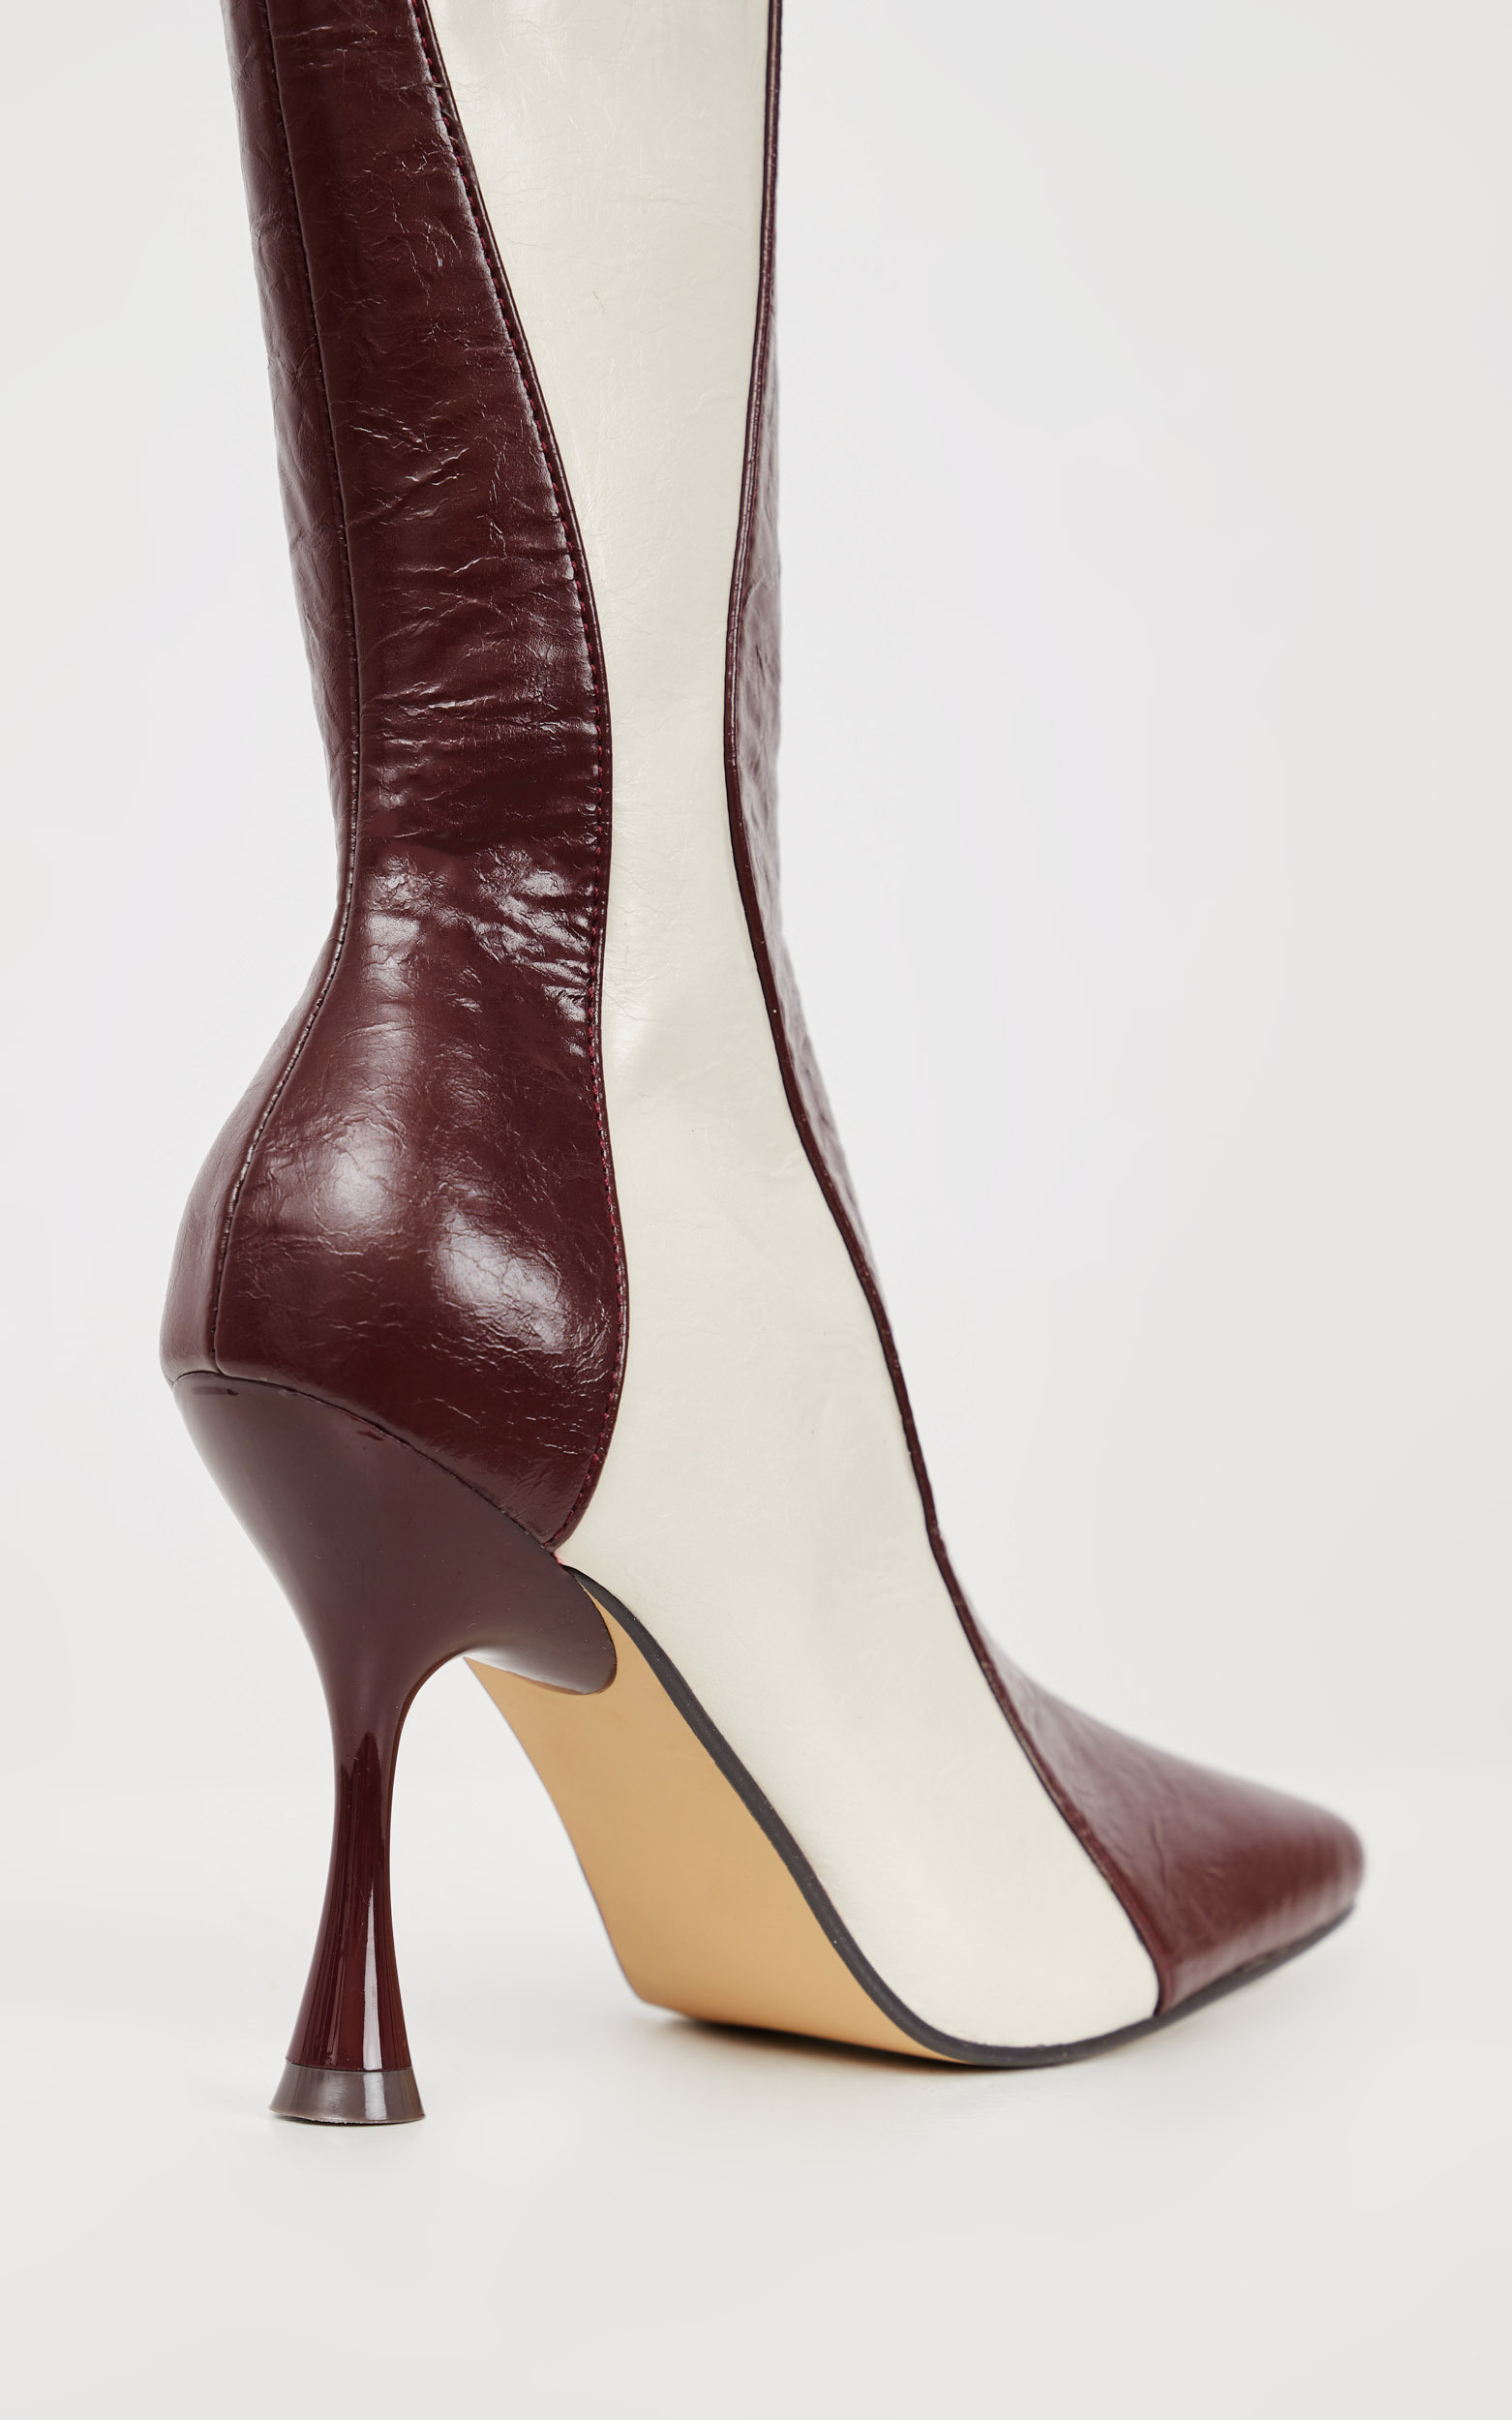 4th & Reckless - Tiffany Ankle Boots in Maroon and Cream - 05, CRE1, hi-res image number null